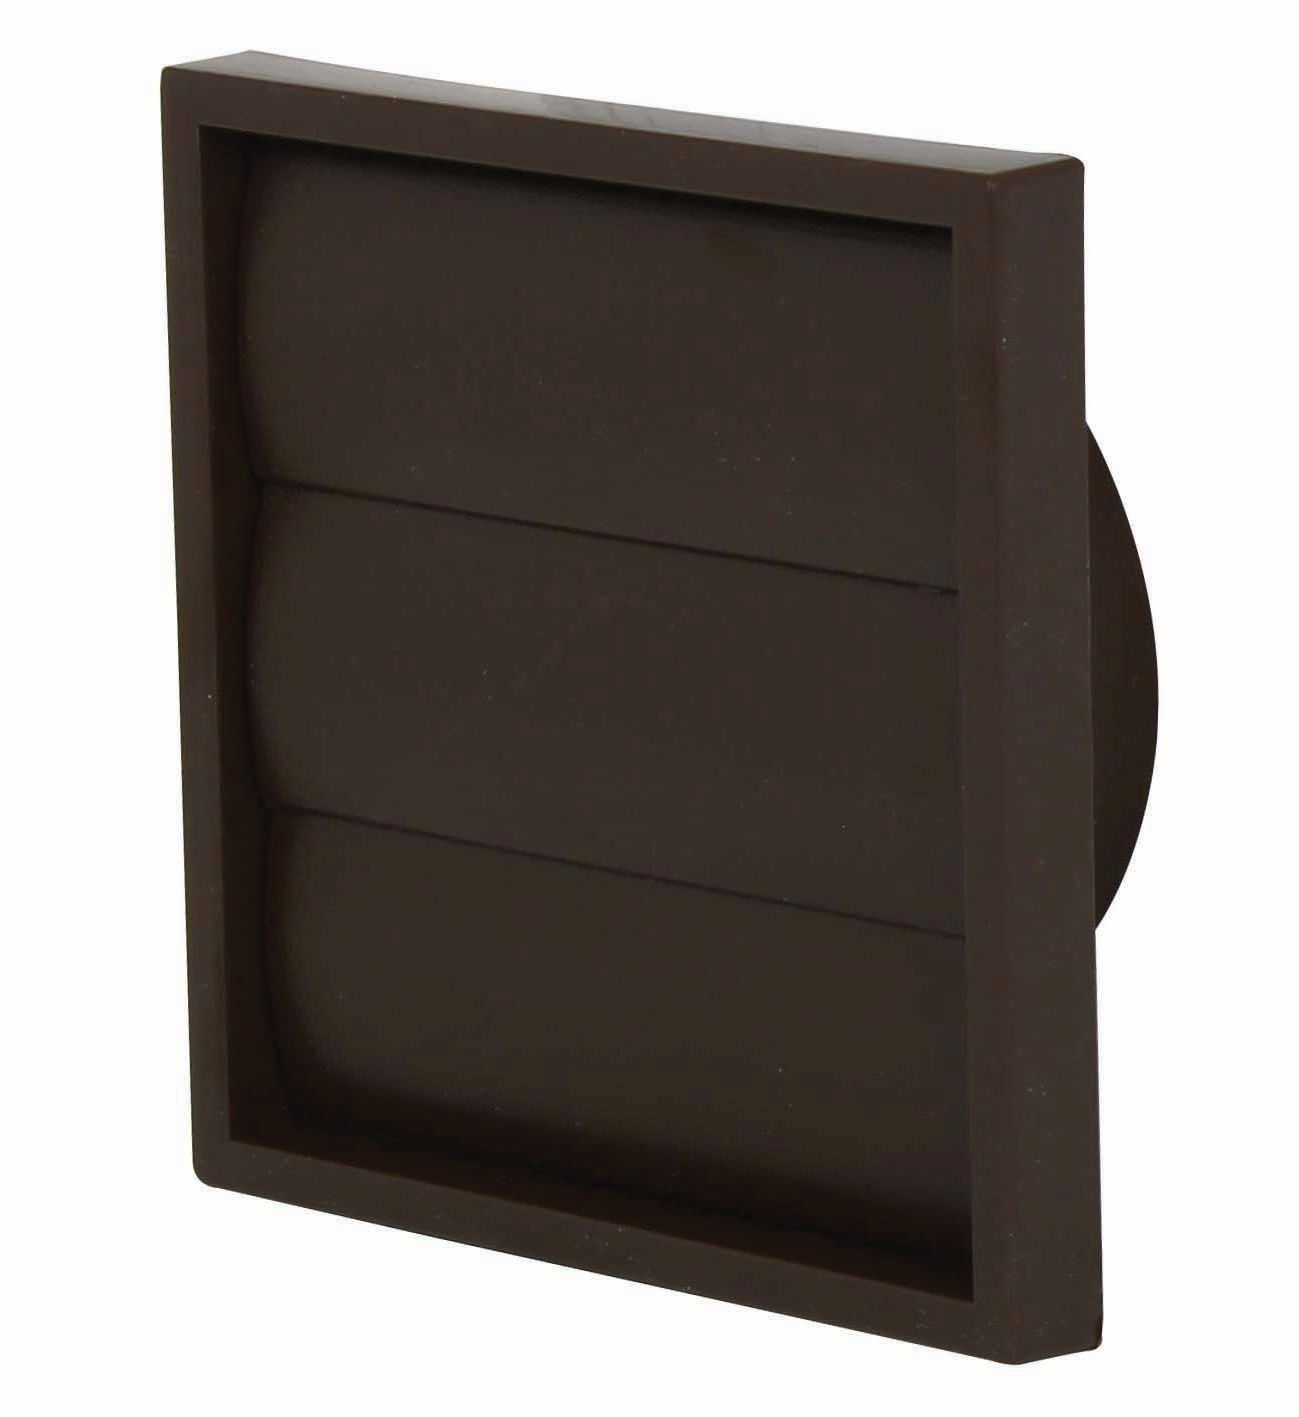 Image of Manrose PVC Gravity Wall Shutter Grille - Brown 100mm